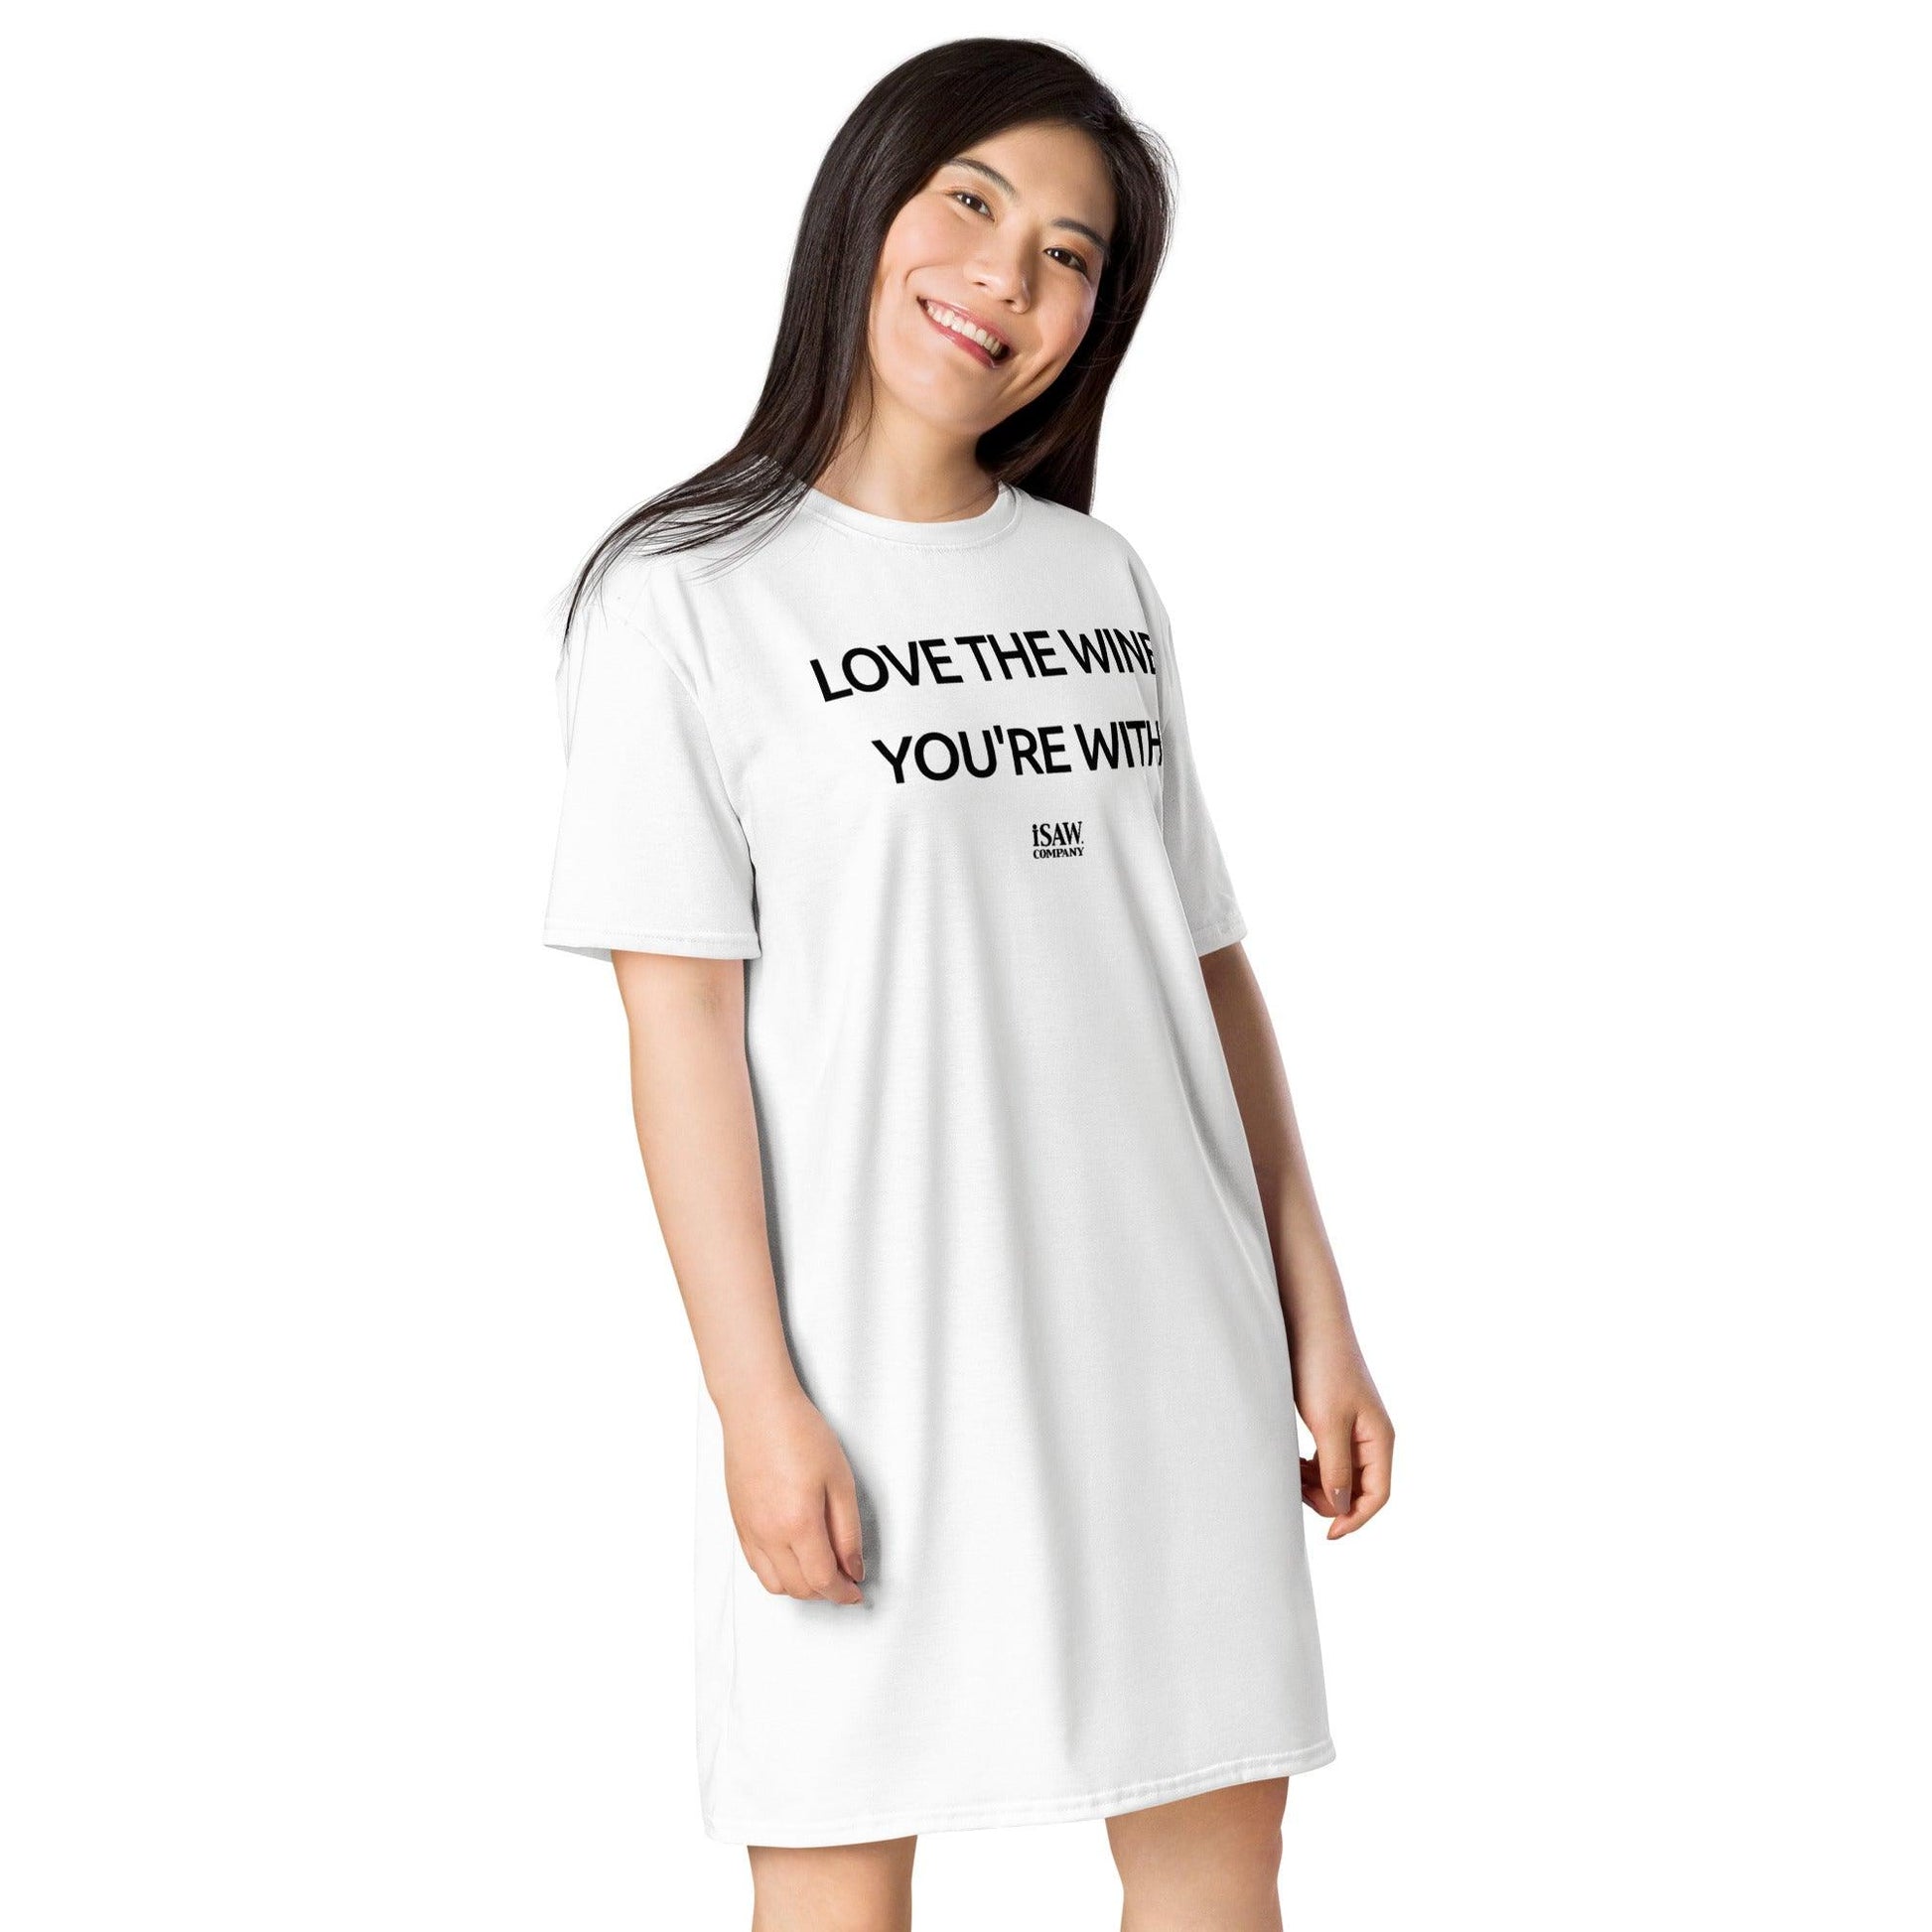 Love The Wine You’re With - Womens White T-Shirt Dress - iSAW Company